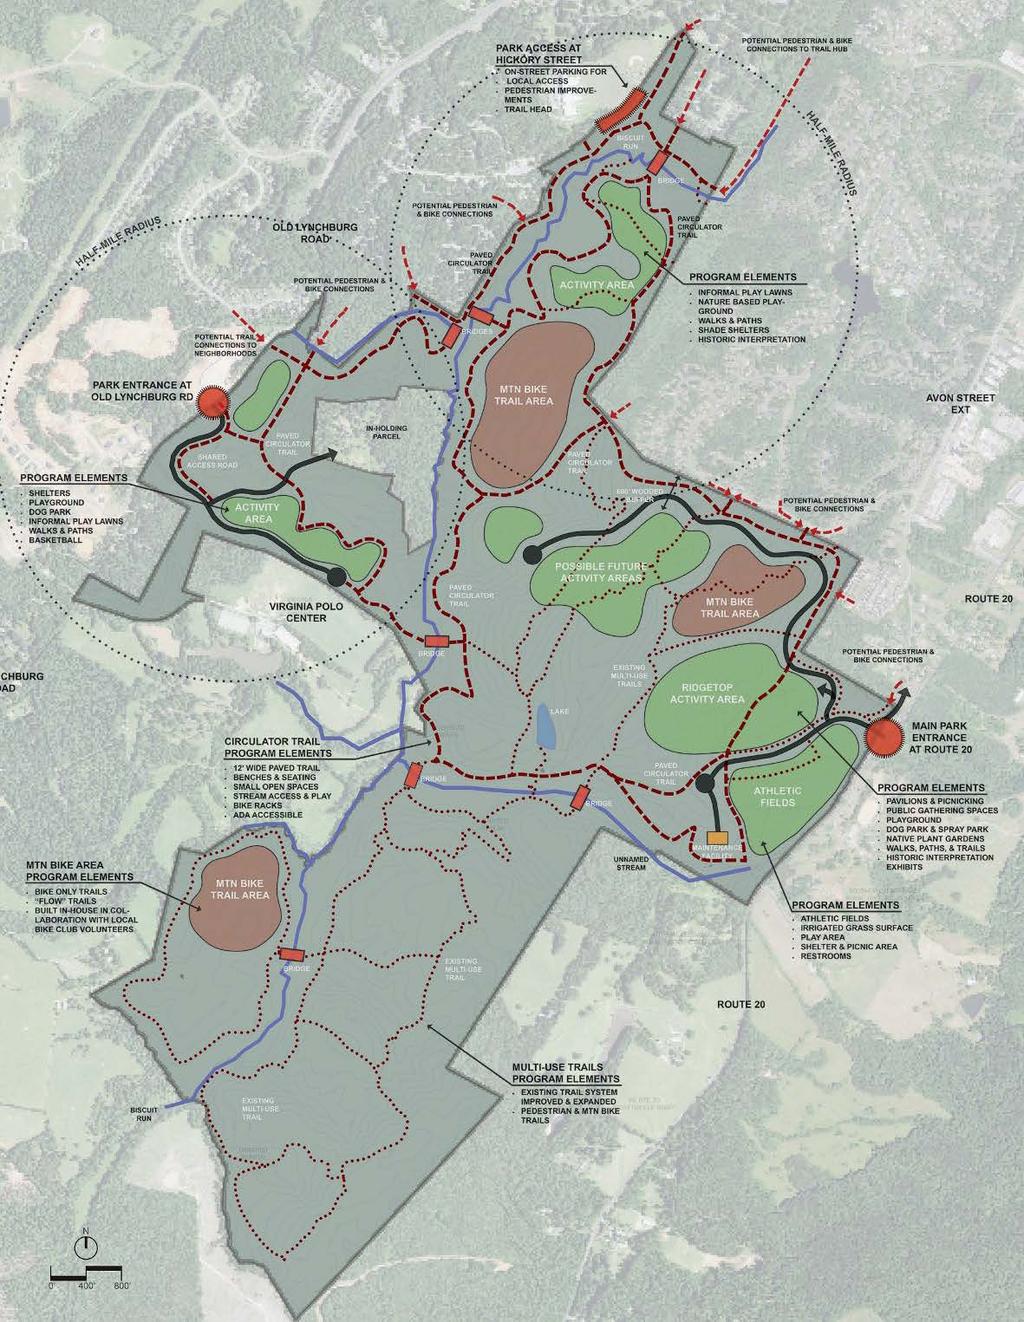 Hickory St. Park Master Plan OLR Entry Mtn Bike Trail Areas Urban Neighborhood Activity Areas 400 Acre Woods Circulator Trails Existing Multi-use Trails Future Activity Areas Rte.